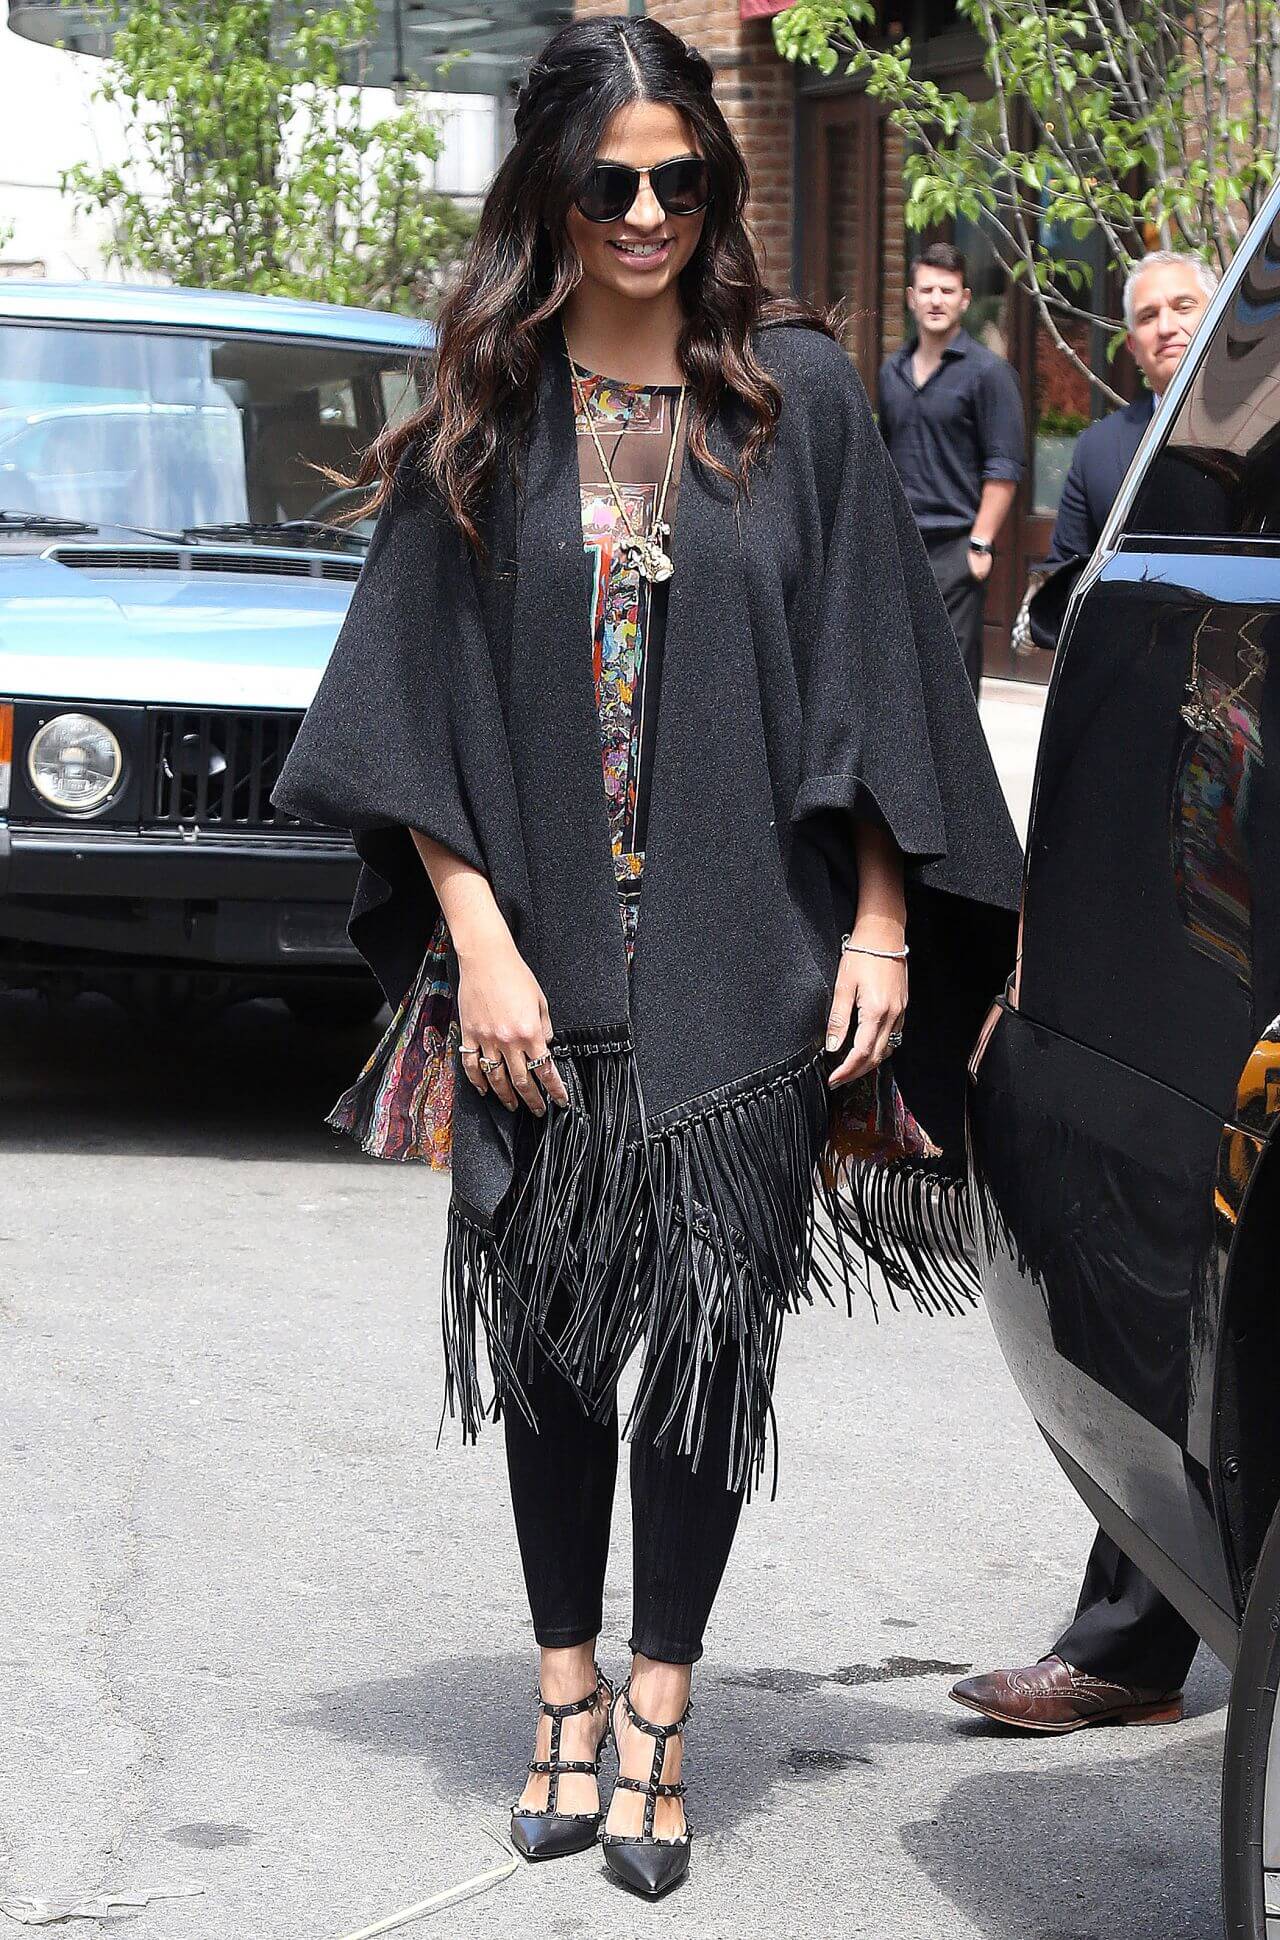 Camila Alves Pretty Looks In a Black Fringe Poncho At Steps Out in Tribeca